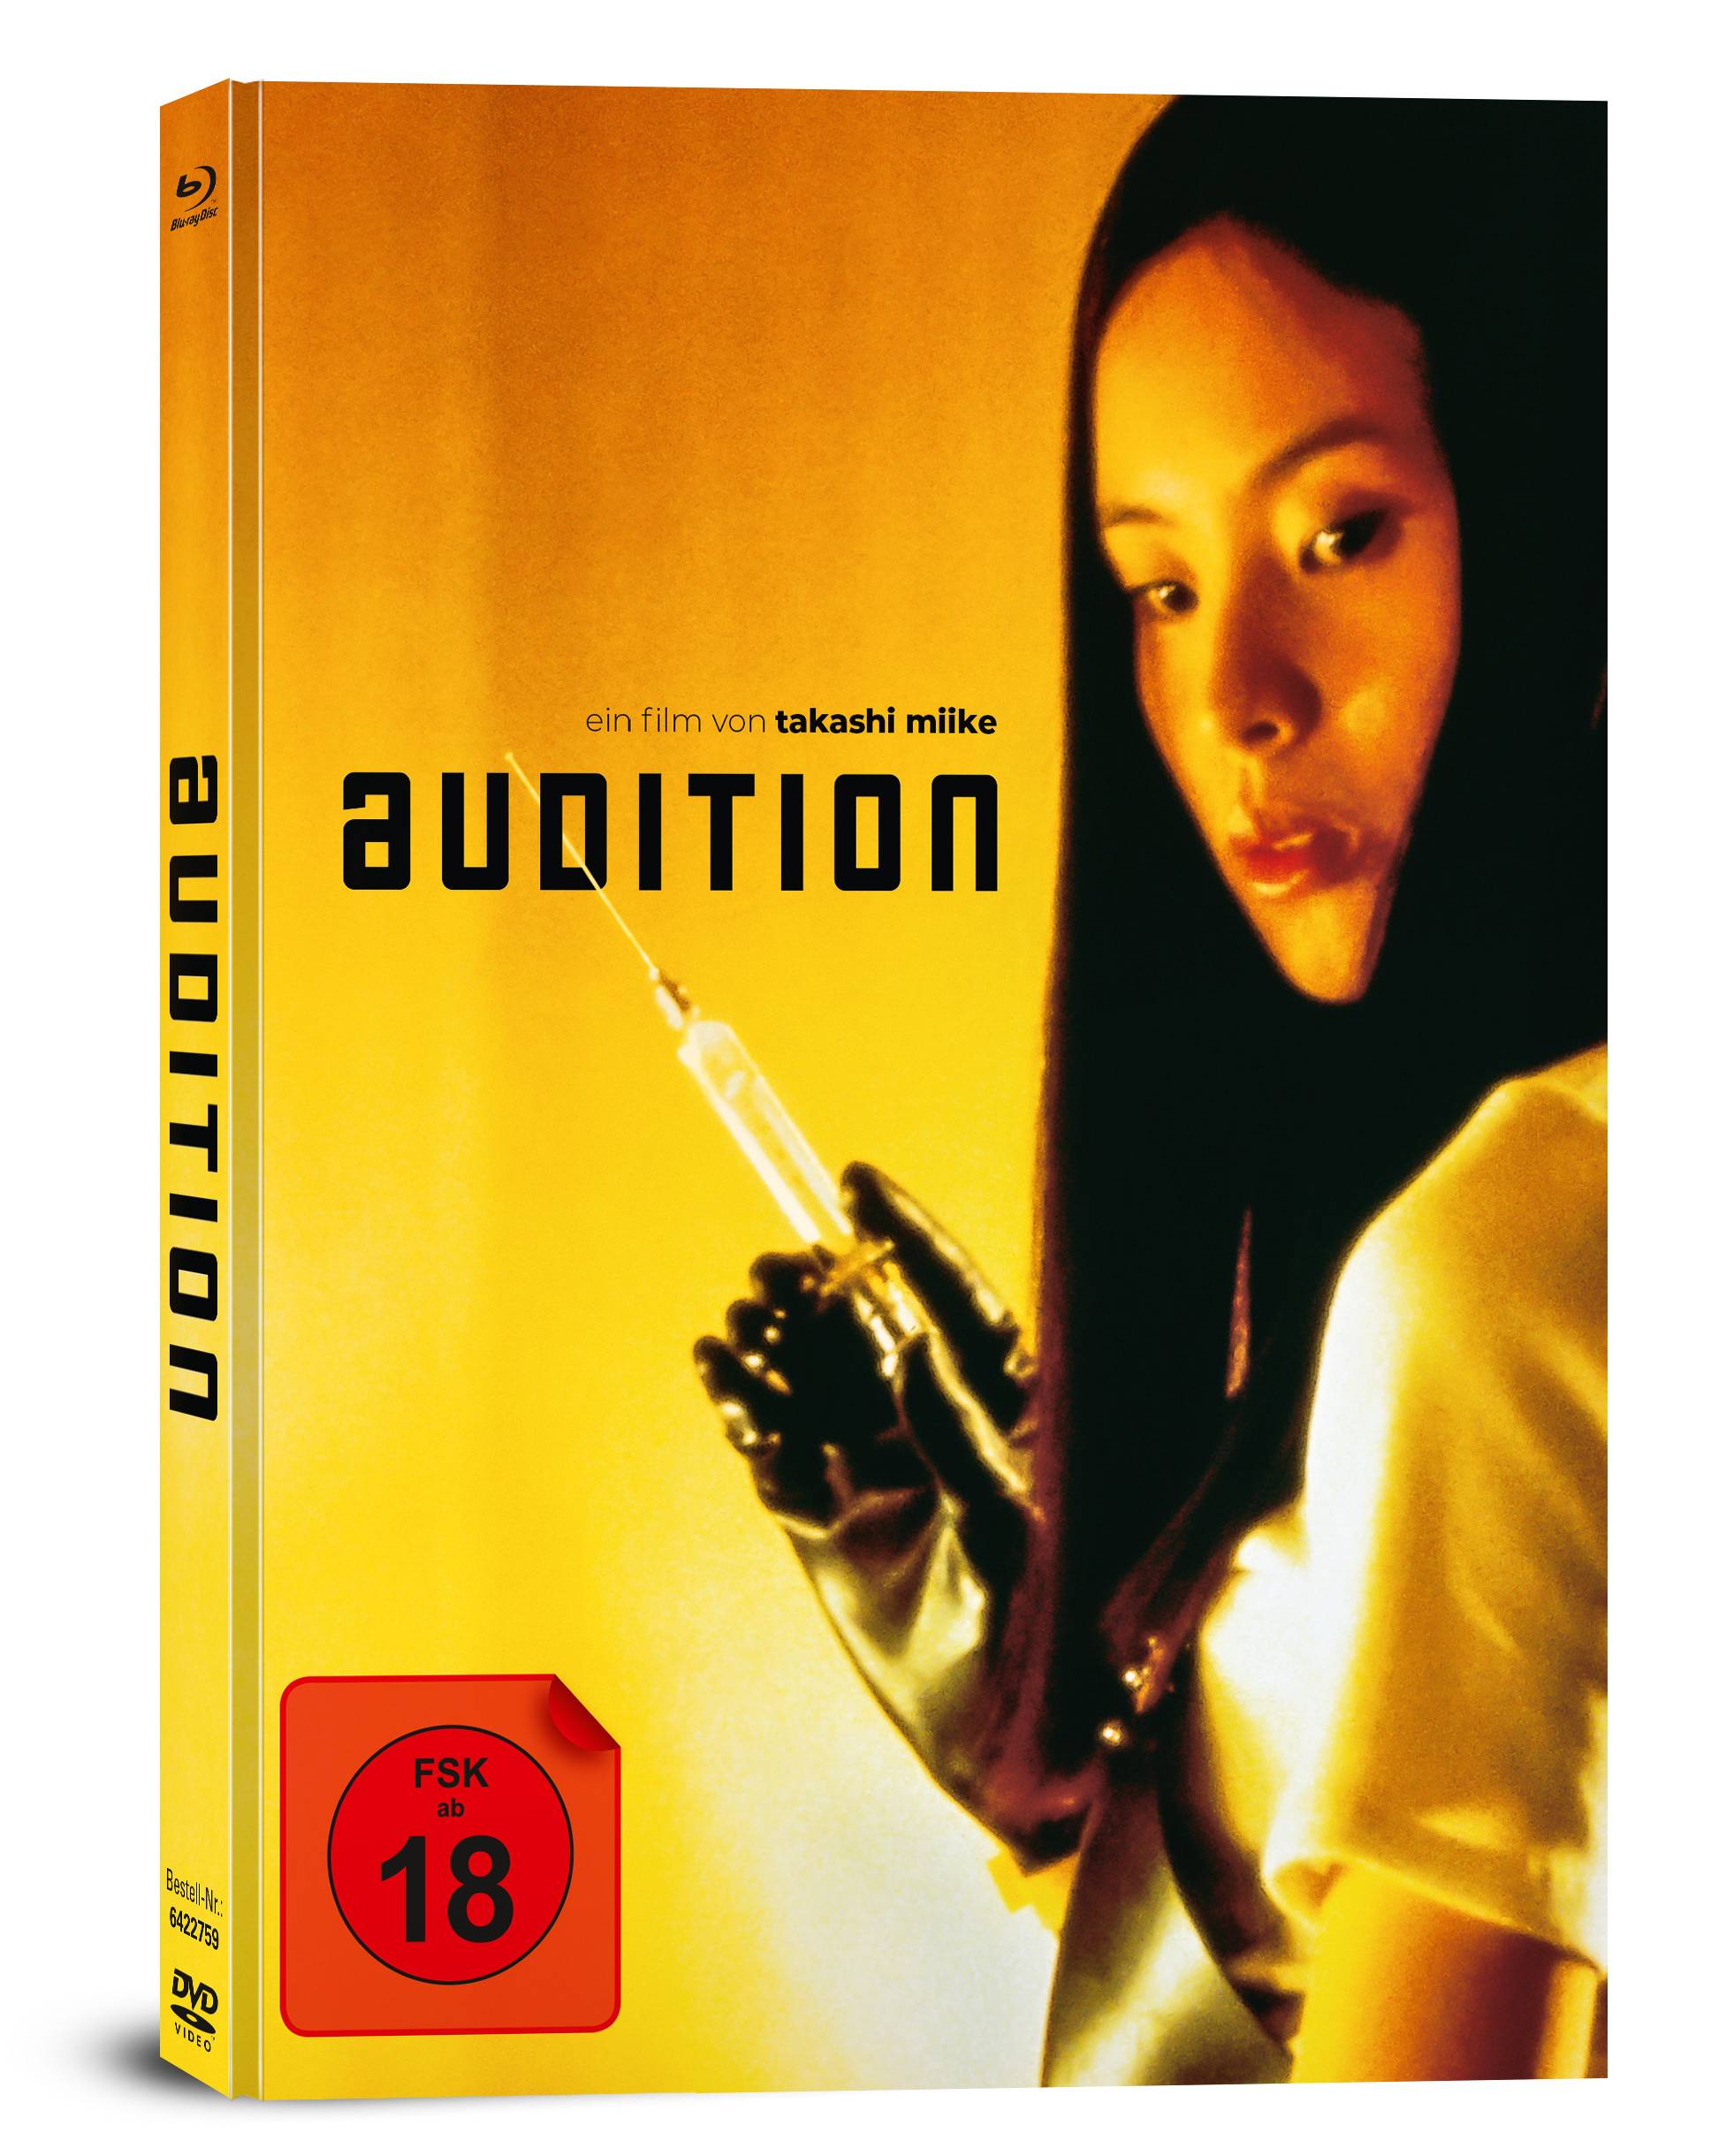 Audition - 2-Disc Limited Collector's Edition im Mediabook (Blu-ray + DVD)